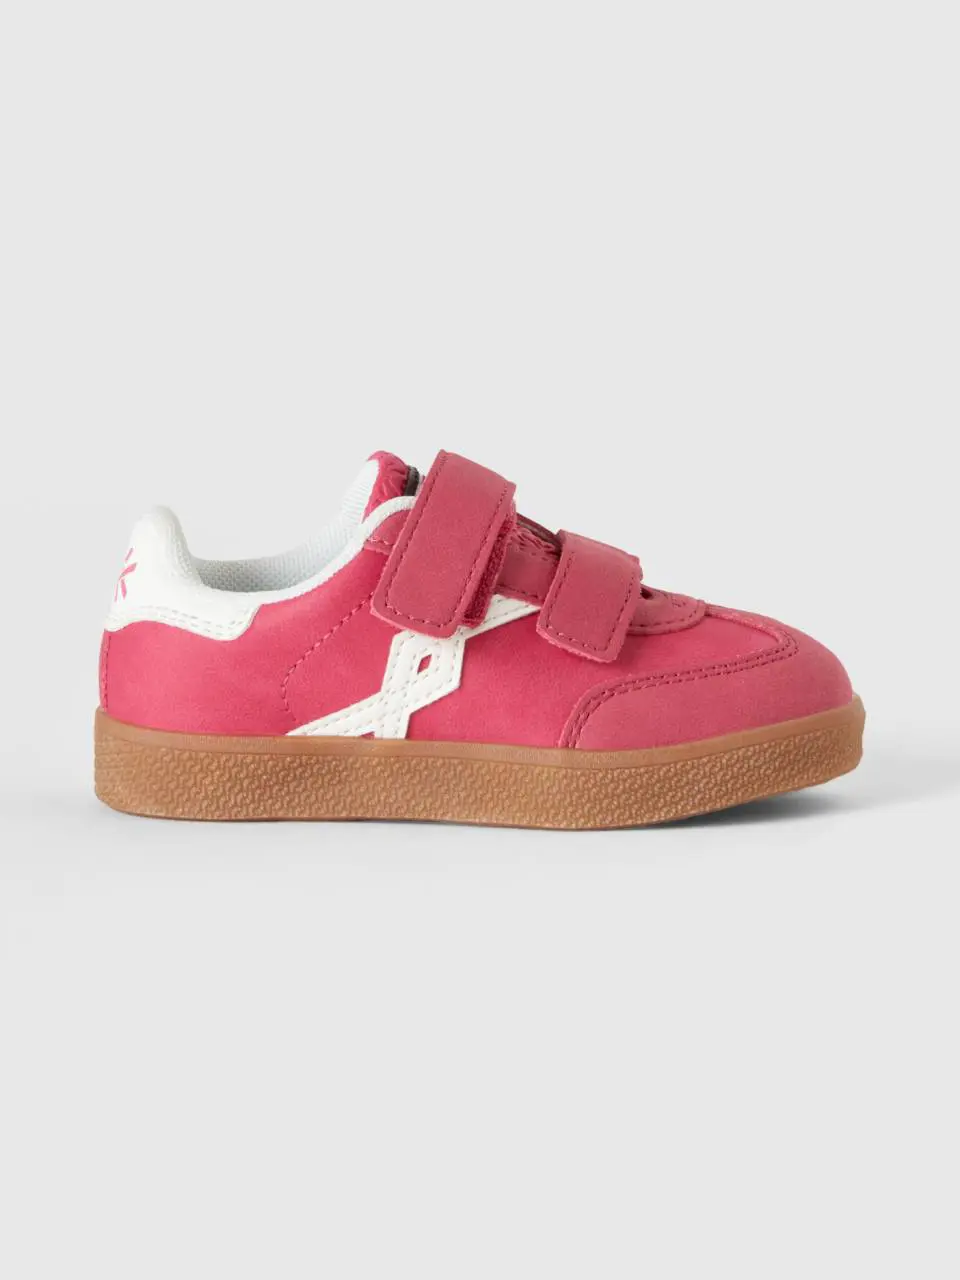 Benetton sneakers in imitation leather. 1